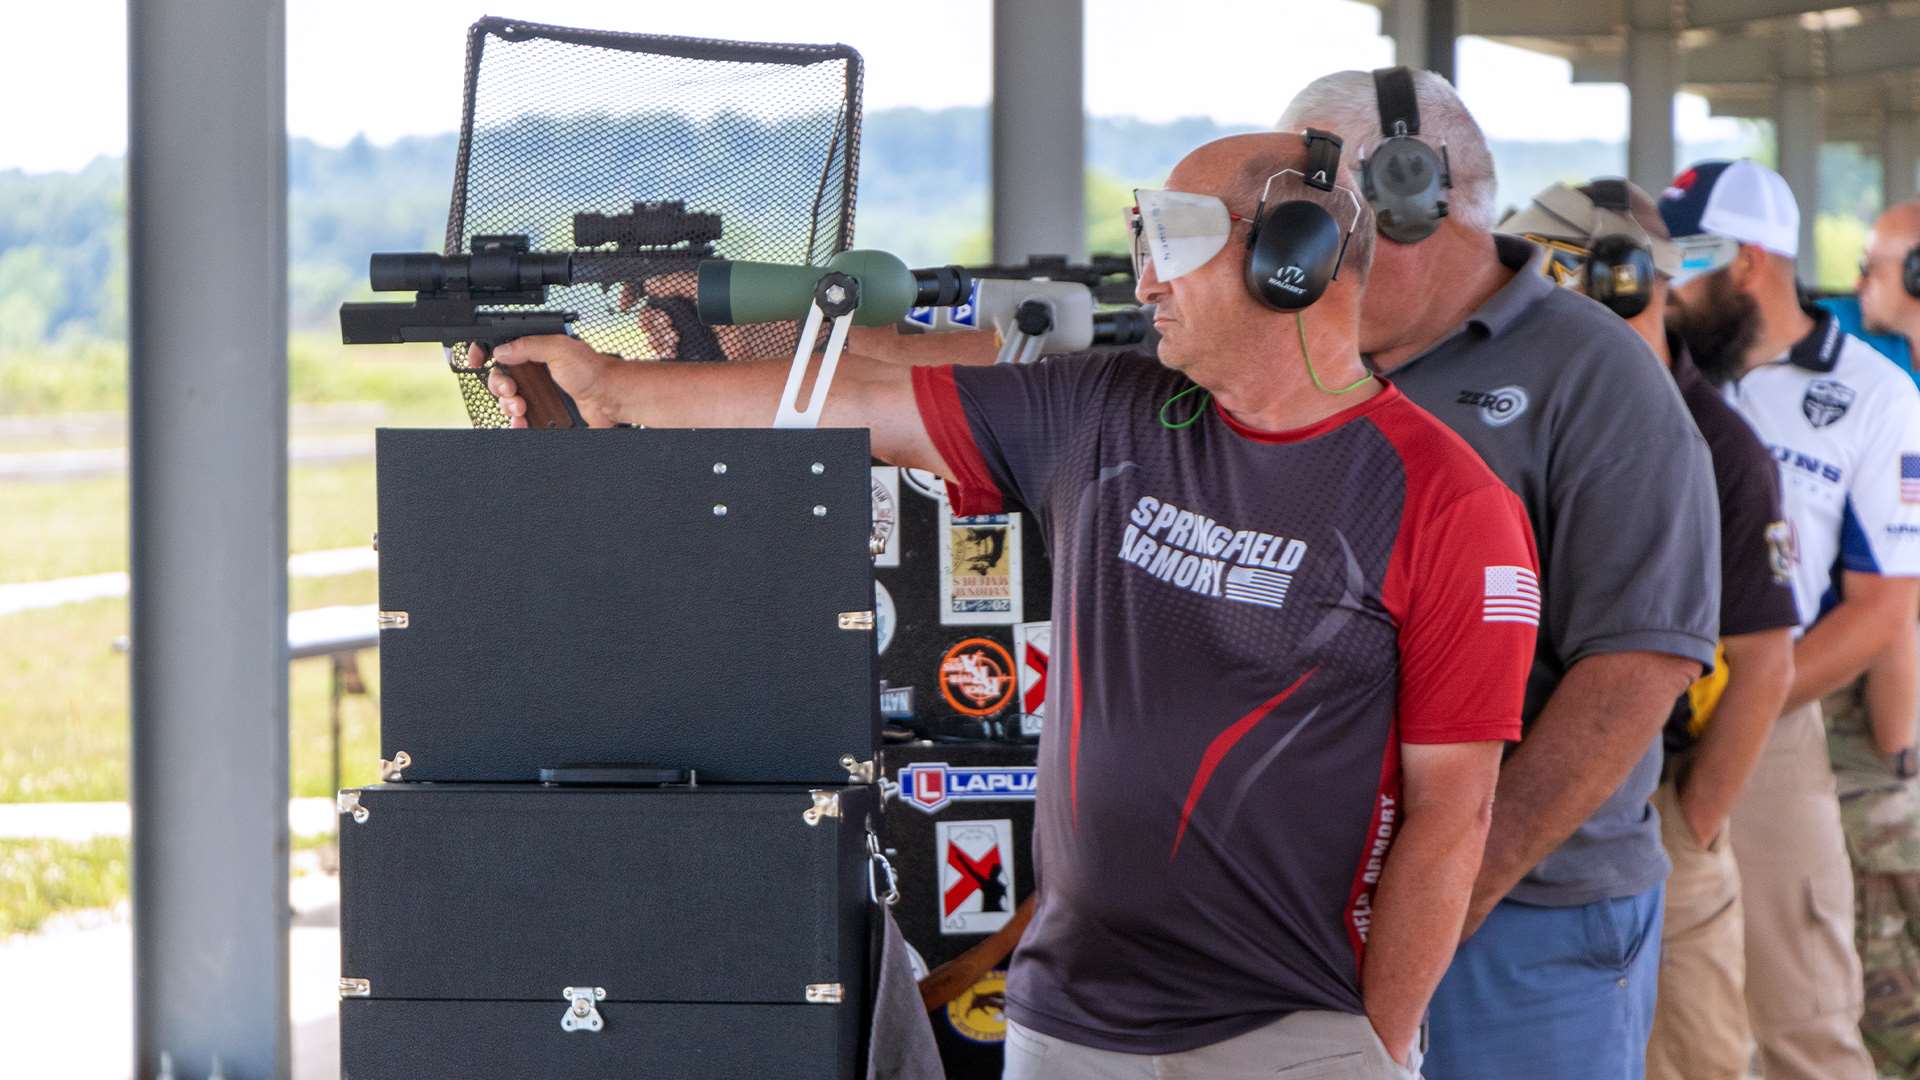 NRA Precision Pistol competitive shooters